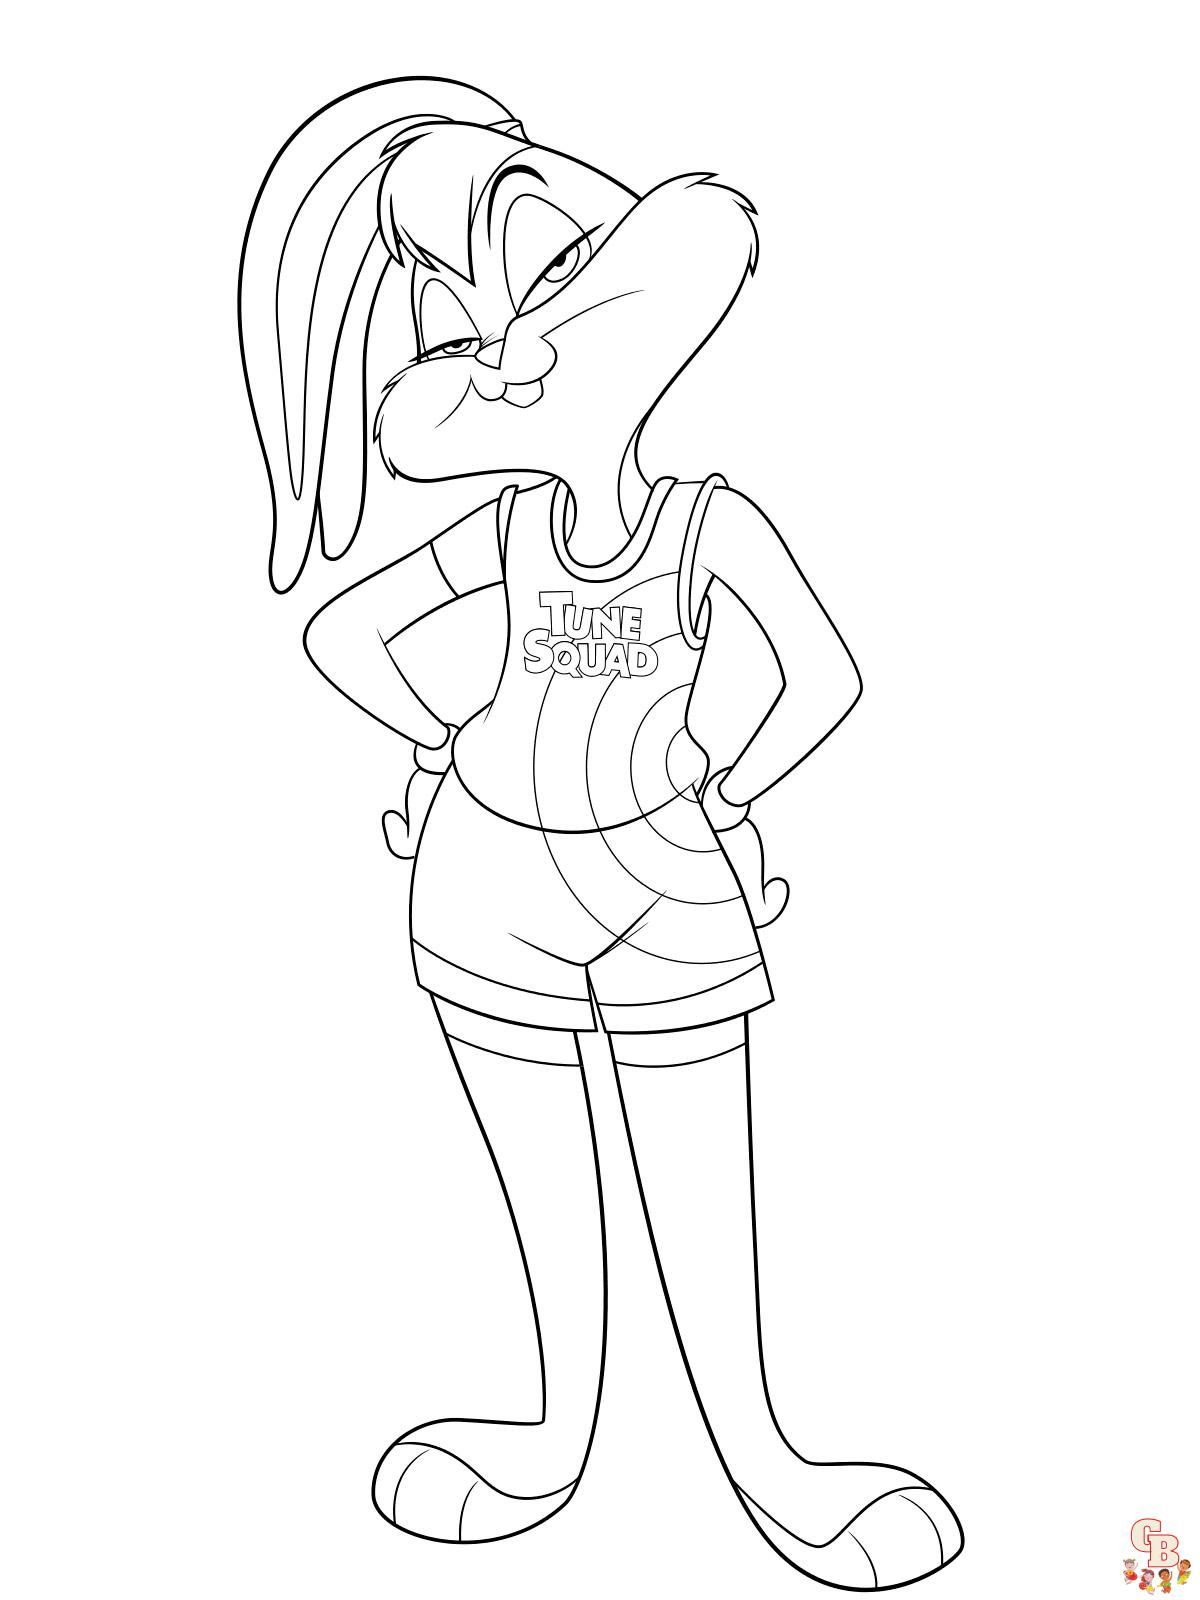 Free printable space jam coloring pages for kids